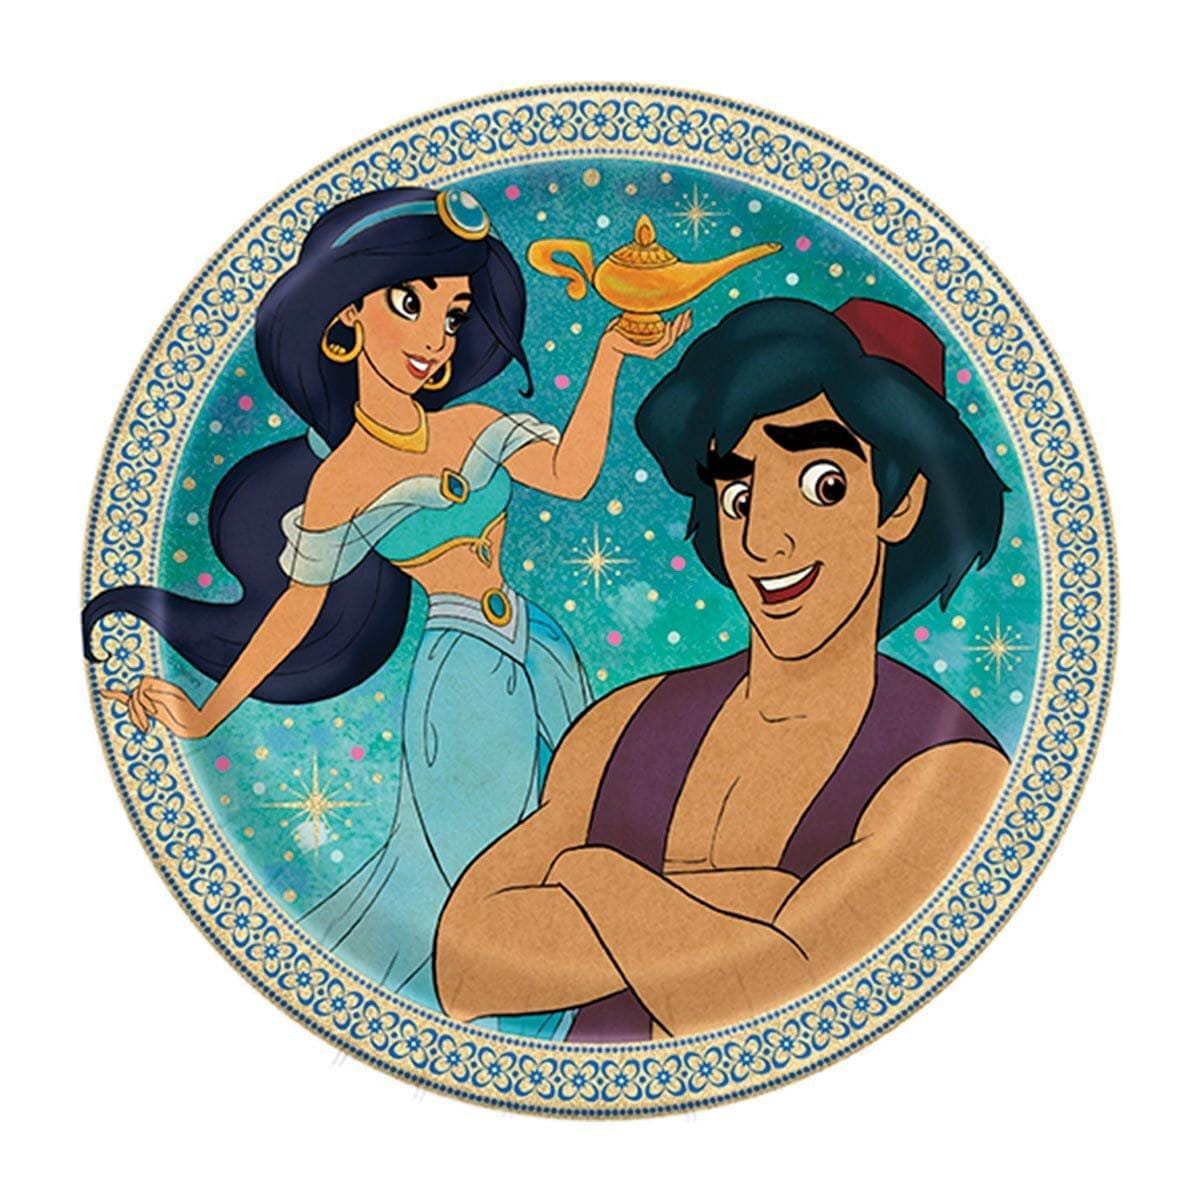 Buy Kids Birthday Aladdin Dessert plates 7 inches, 8 per package sold at Party Expert